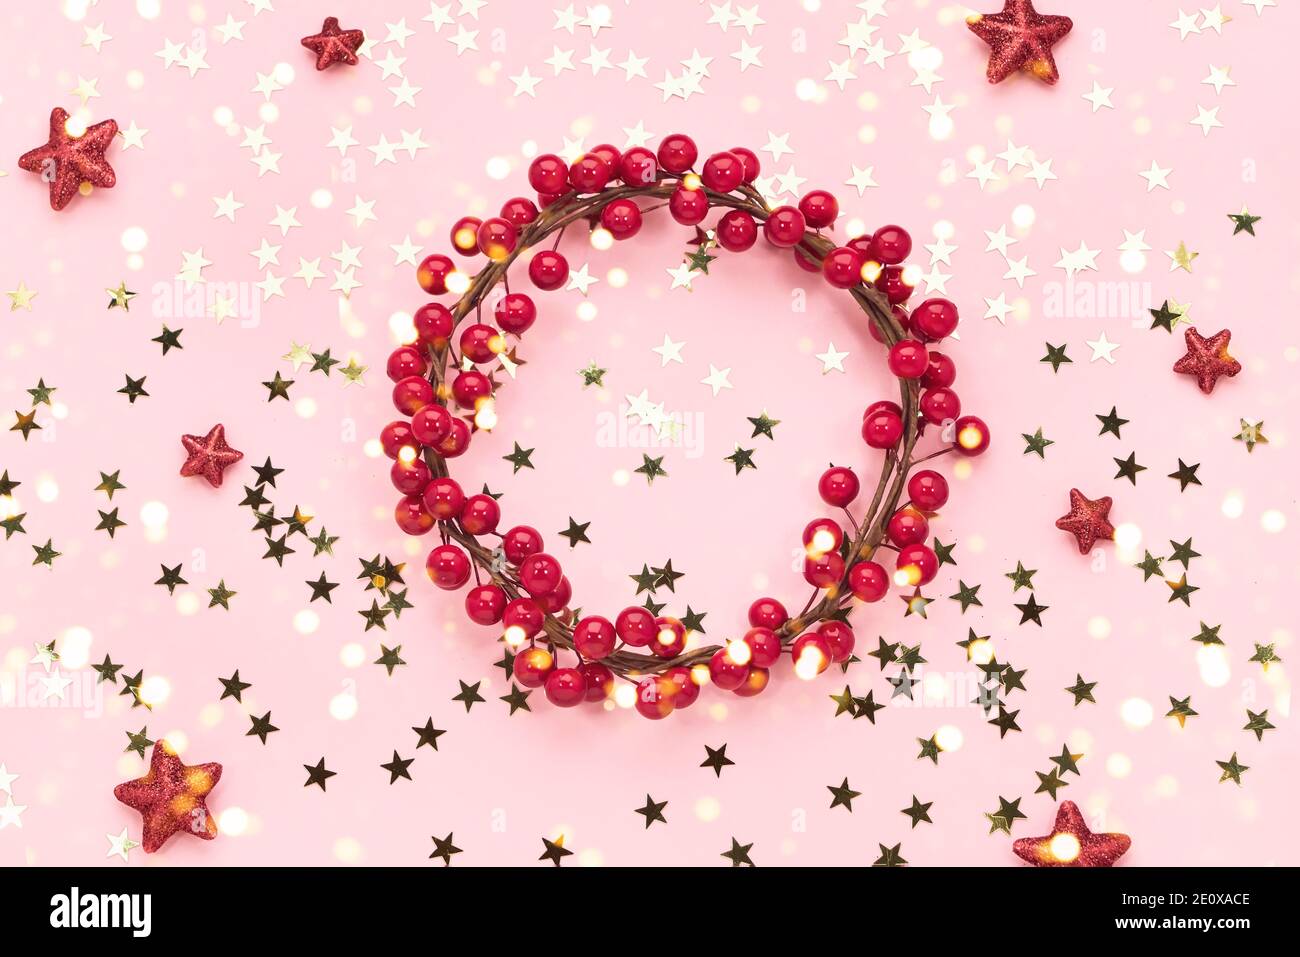 https://c8.alamy.com/comp/2E0XACE/christmas-background-red-christmas-decoration-on-pink-background-copy-space-2E0XACE.jpg